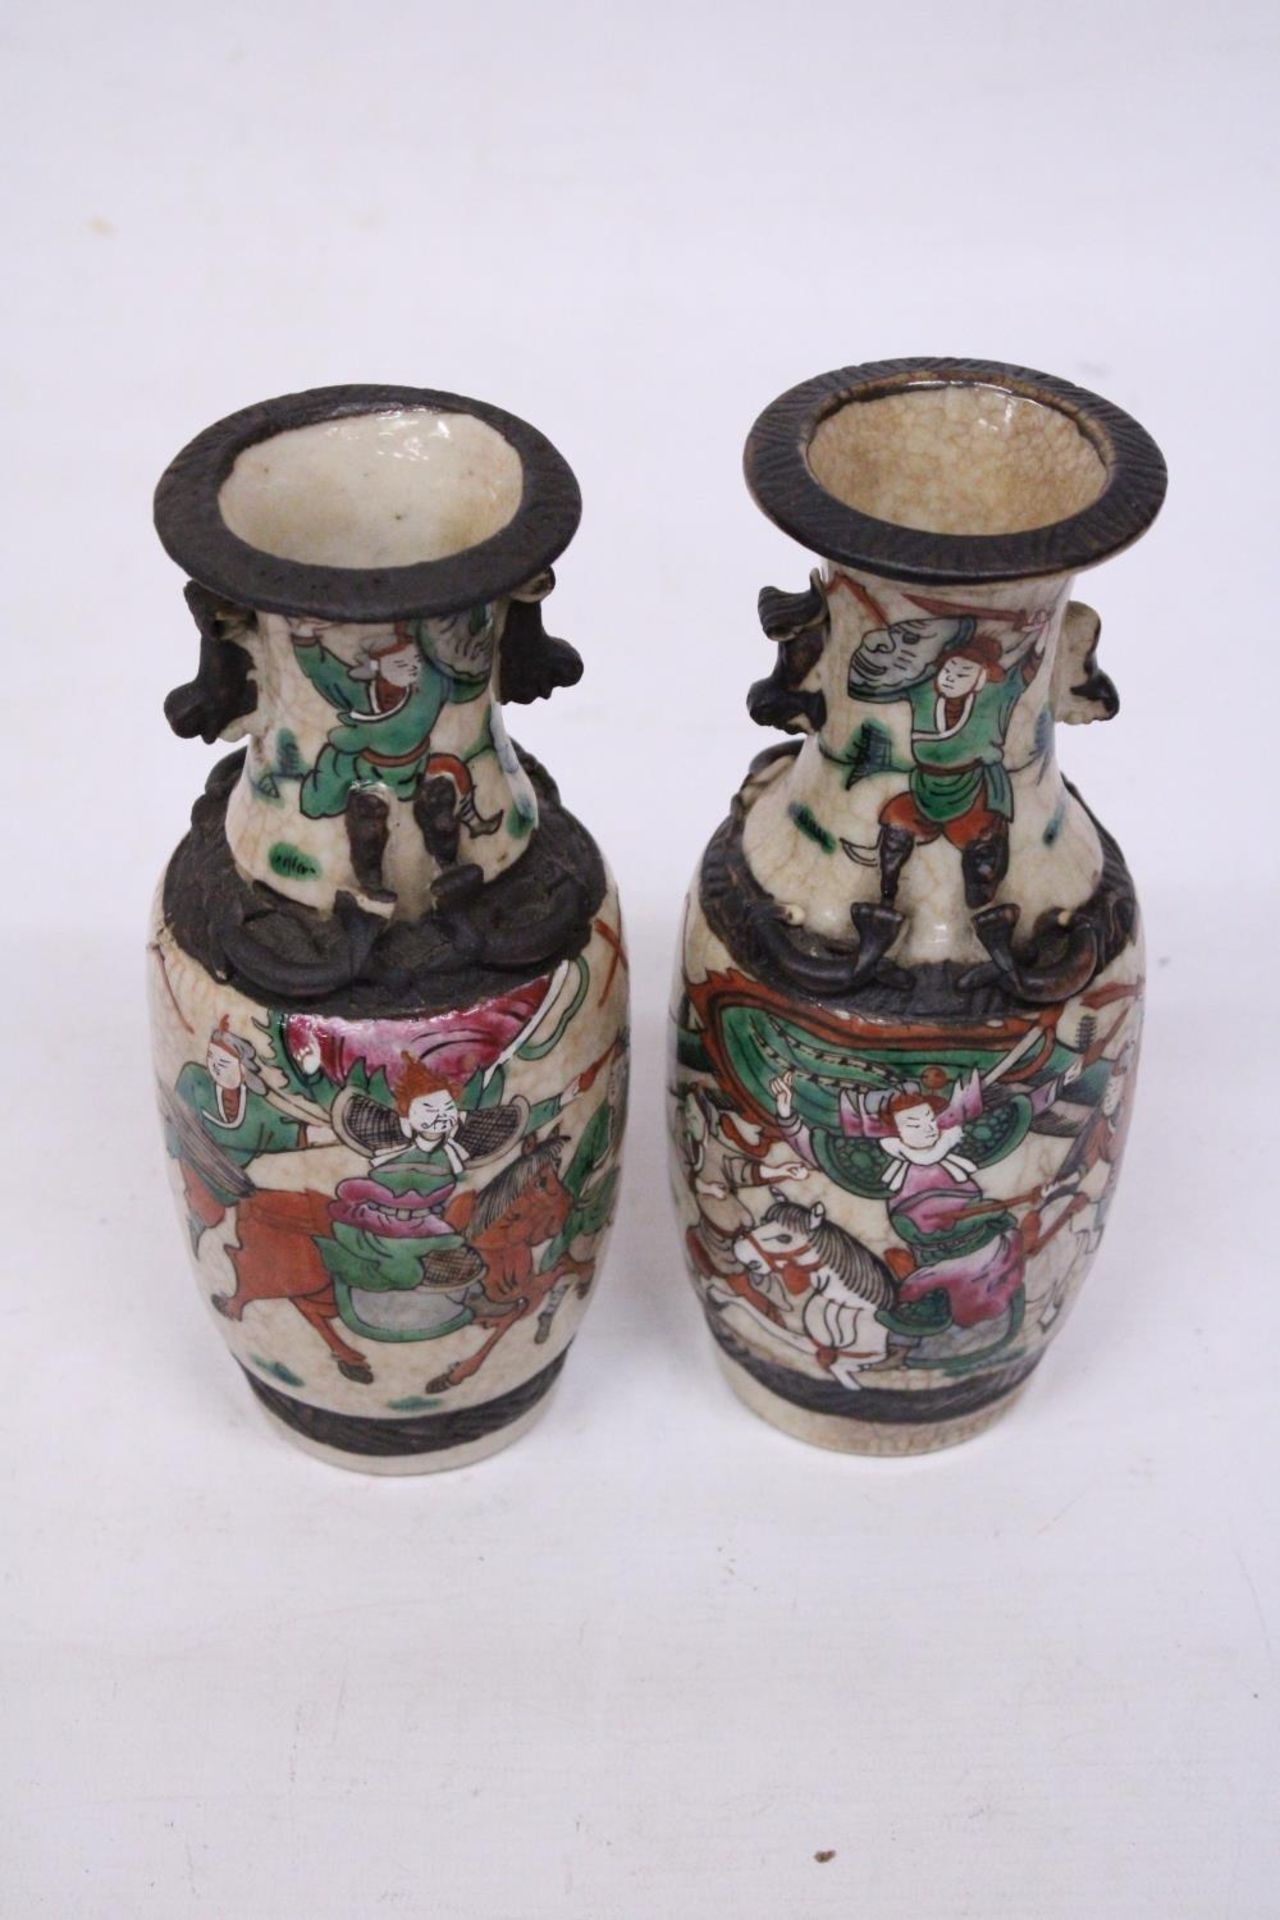 A PAIR OF CHINESE CRACKLE GLAZED VASES WITH WARRIOR SCENES - 18 CM (H) - MARK TO BASE - Image 6 of 6